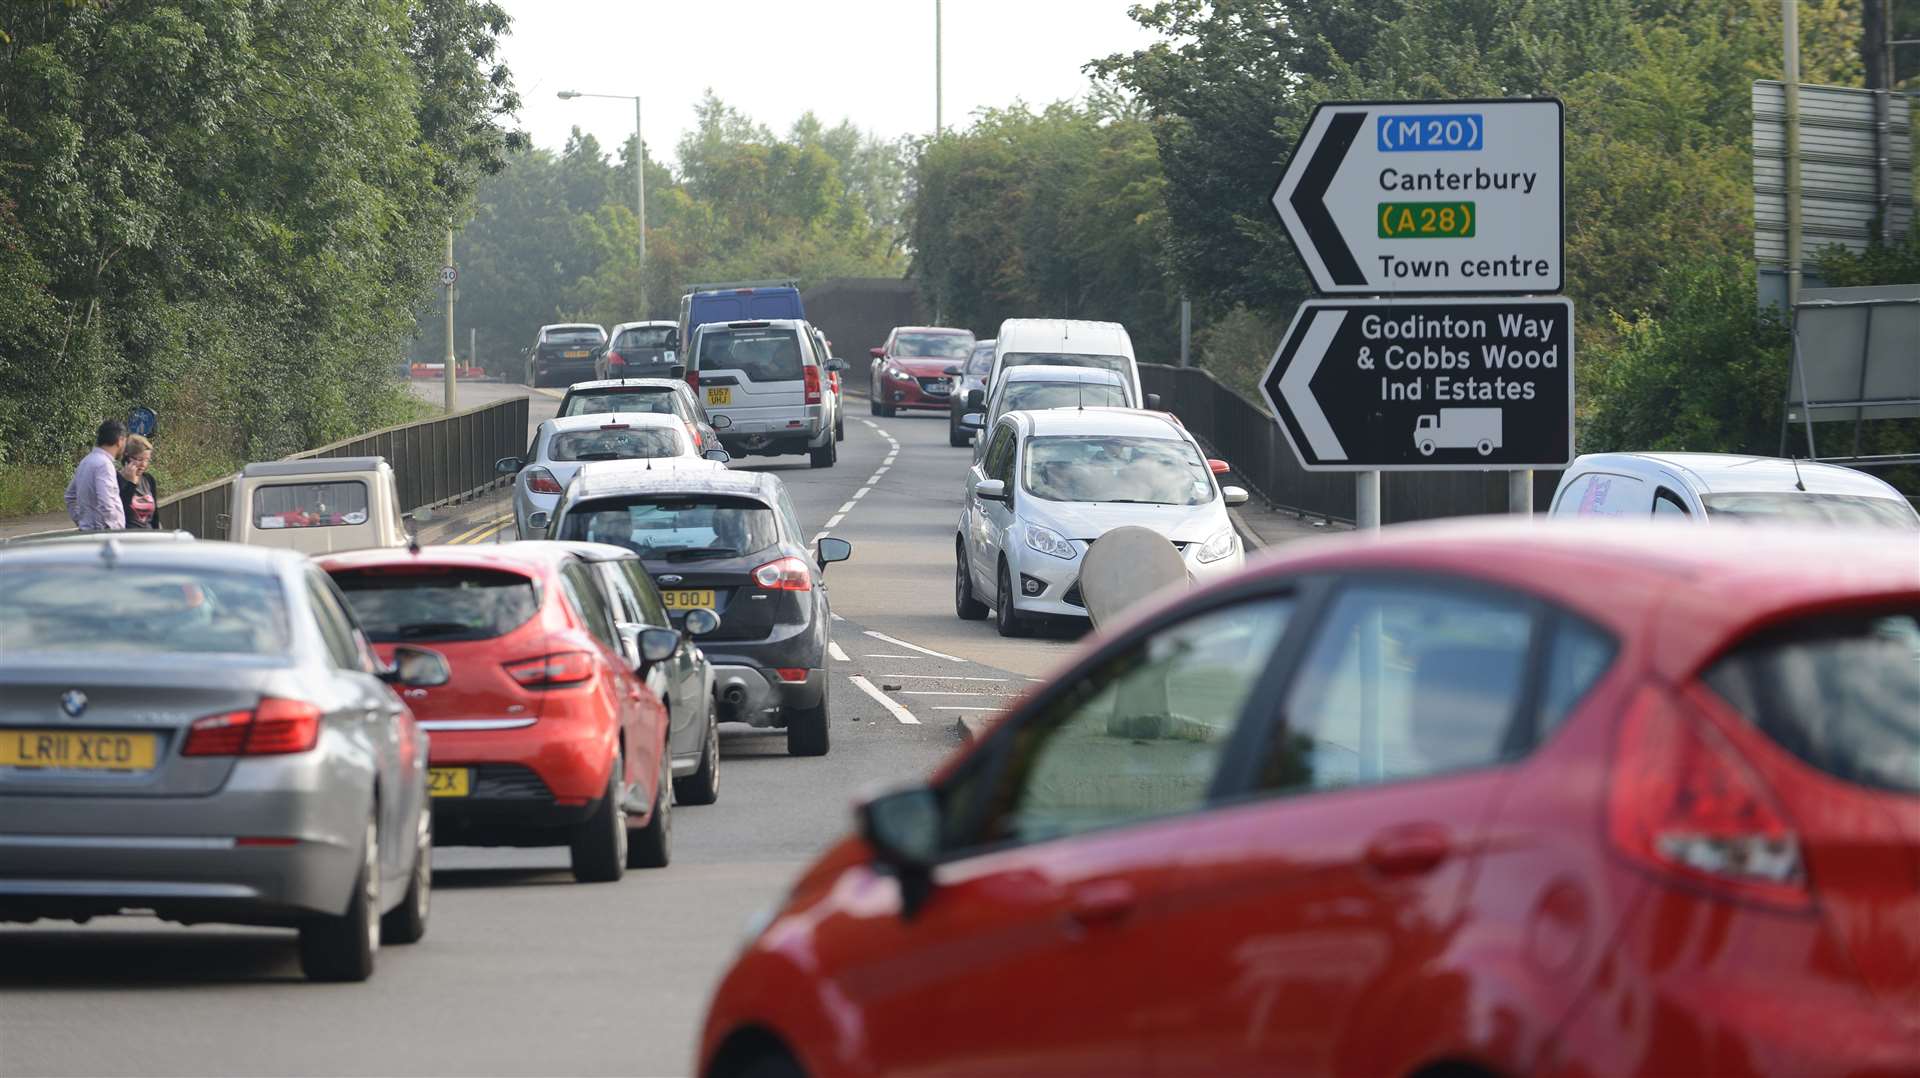 Chart Road is regularly congested, with drivers facing lengthy hold-ups